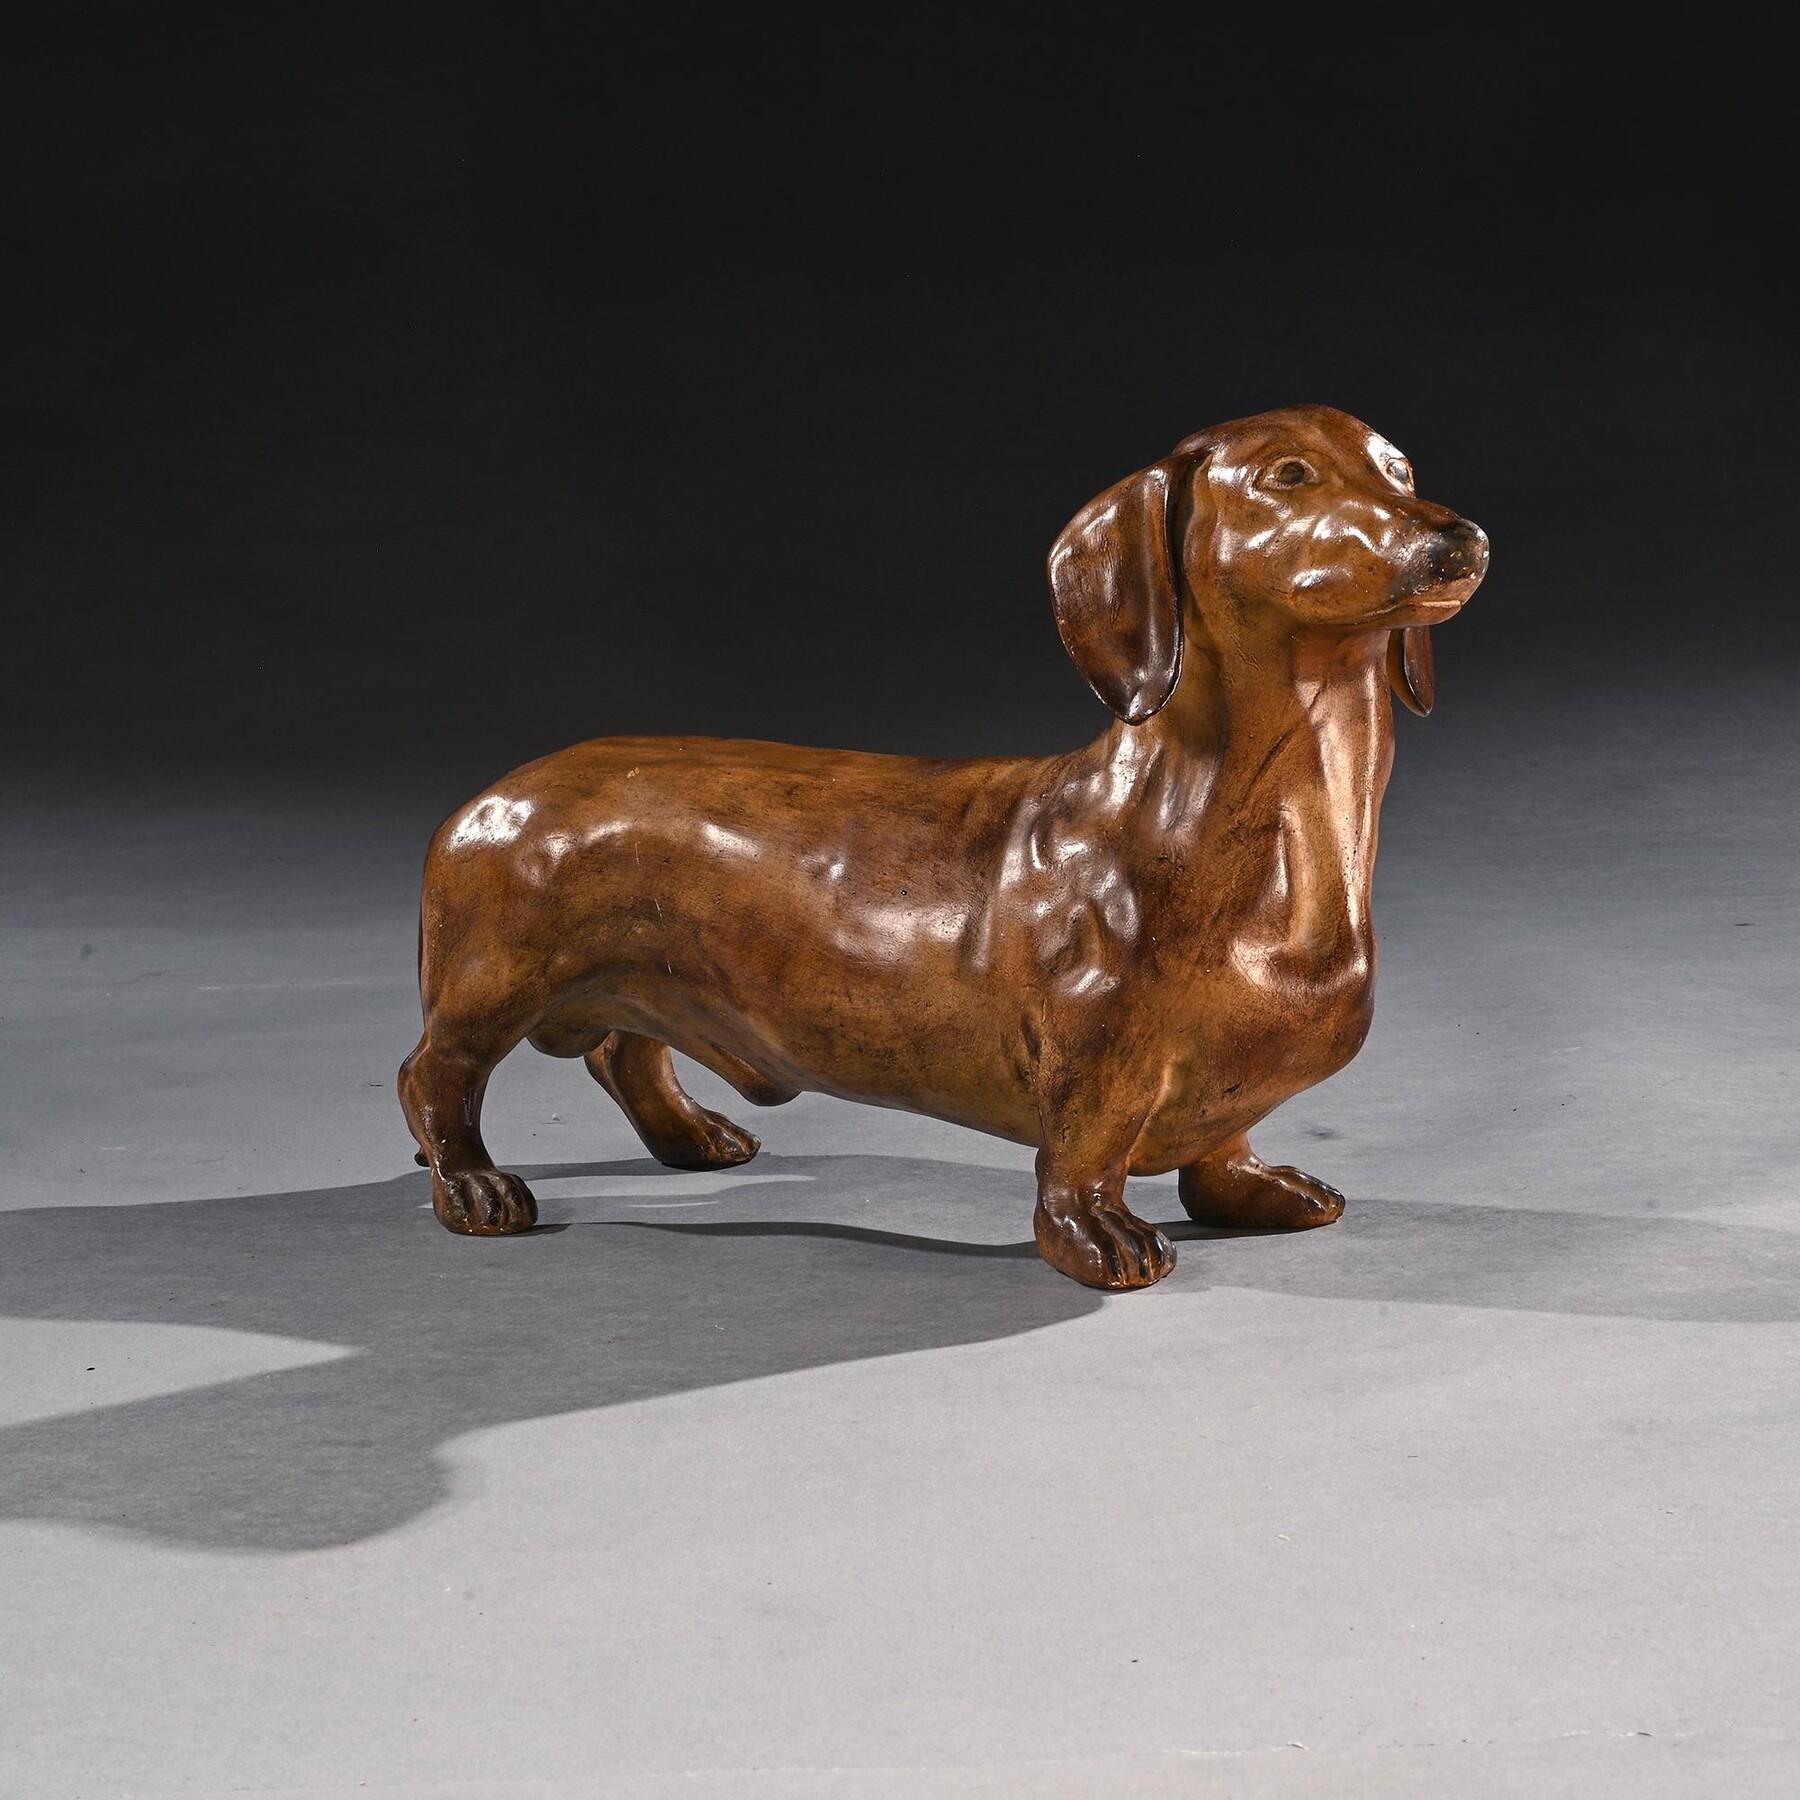 Rare French Life-like Glazed Terracotta Sculpture of a Dachshund Dog In Good Condition For Sale In Benington, Herts